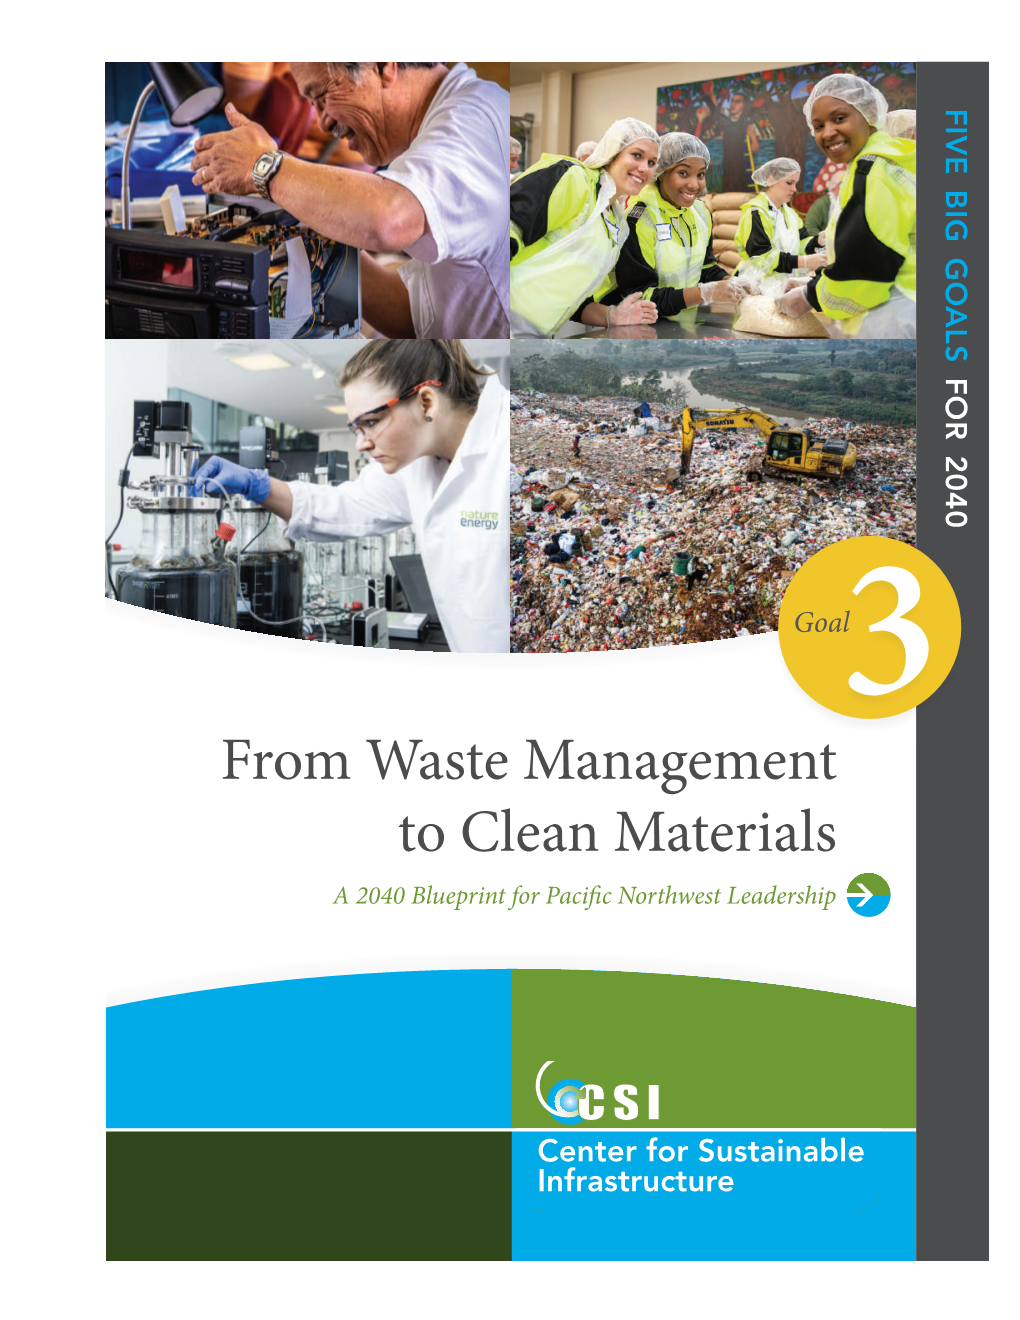 From Waste Management to Clean Materials a 2040 Blueprint for Pacific Northwest Leadership FIVE BIG GOALS 2040 FOR